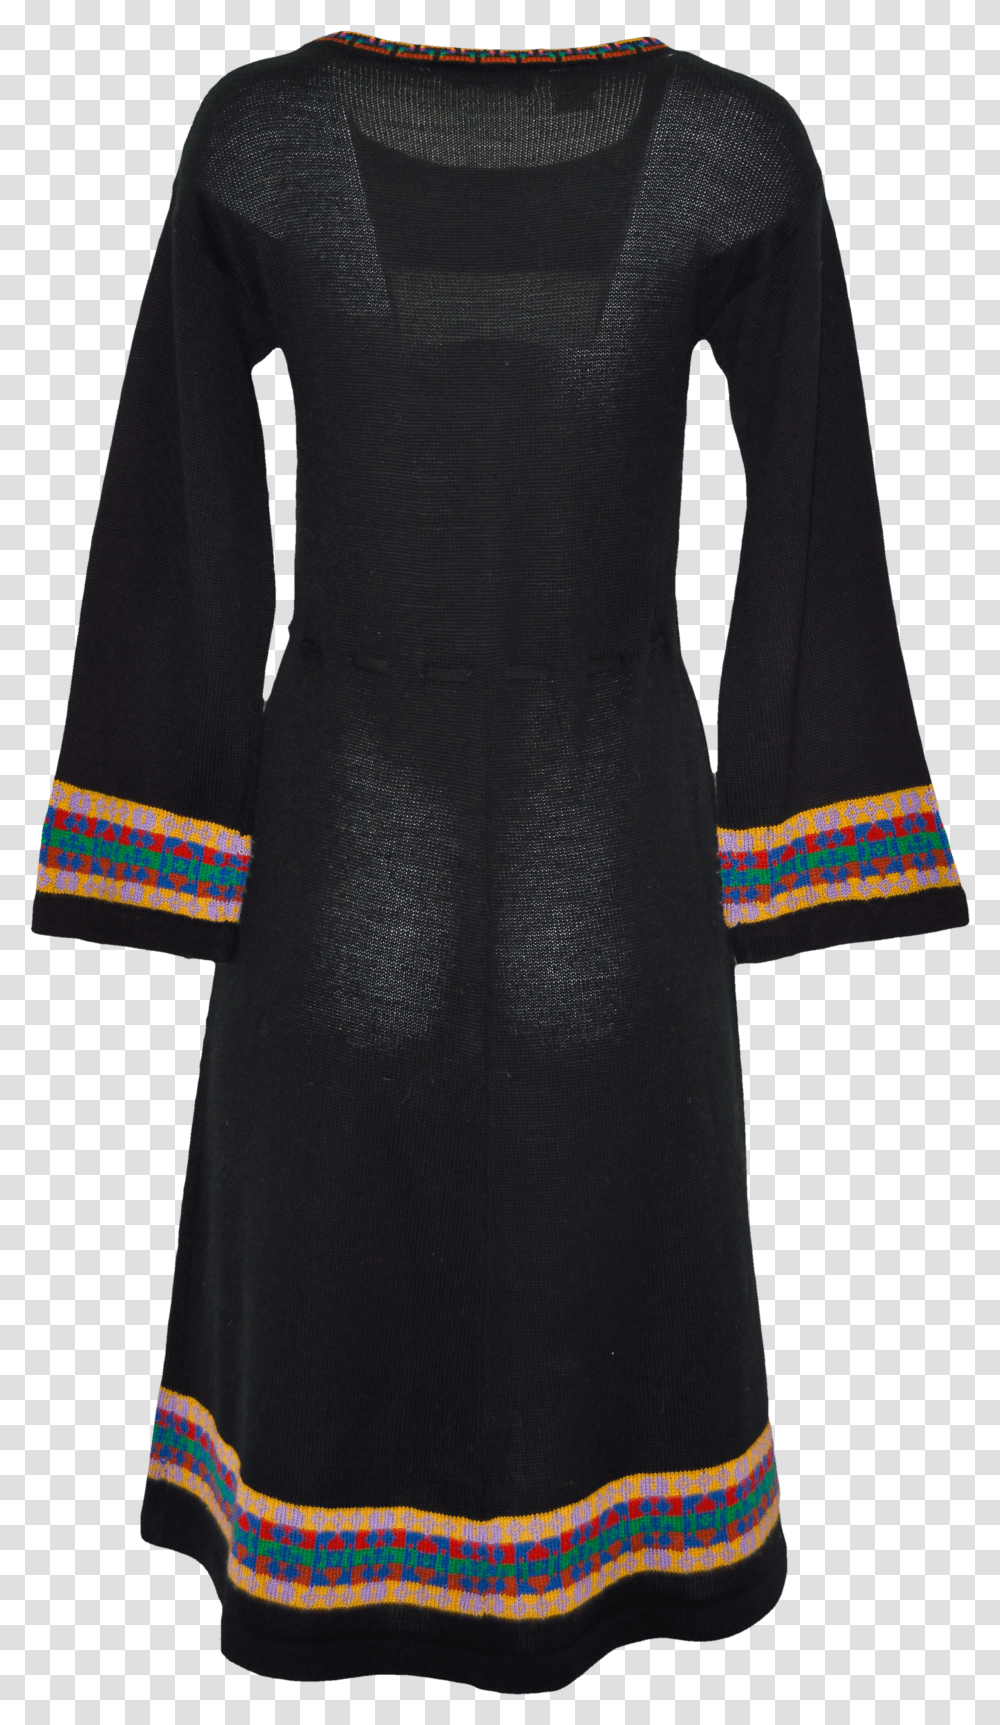 Black Knit Dress With Colorful Tassels By Milanse Dress Day Dress Transparent Png